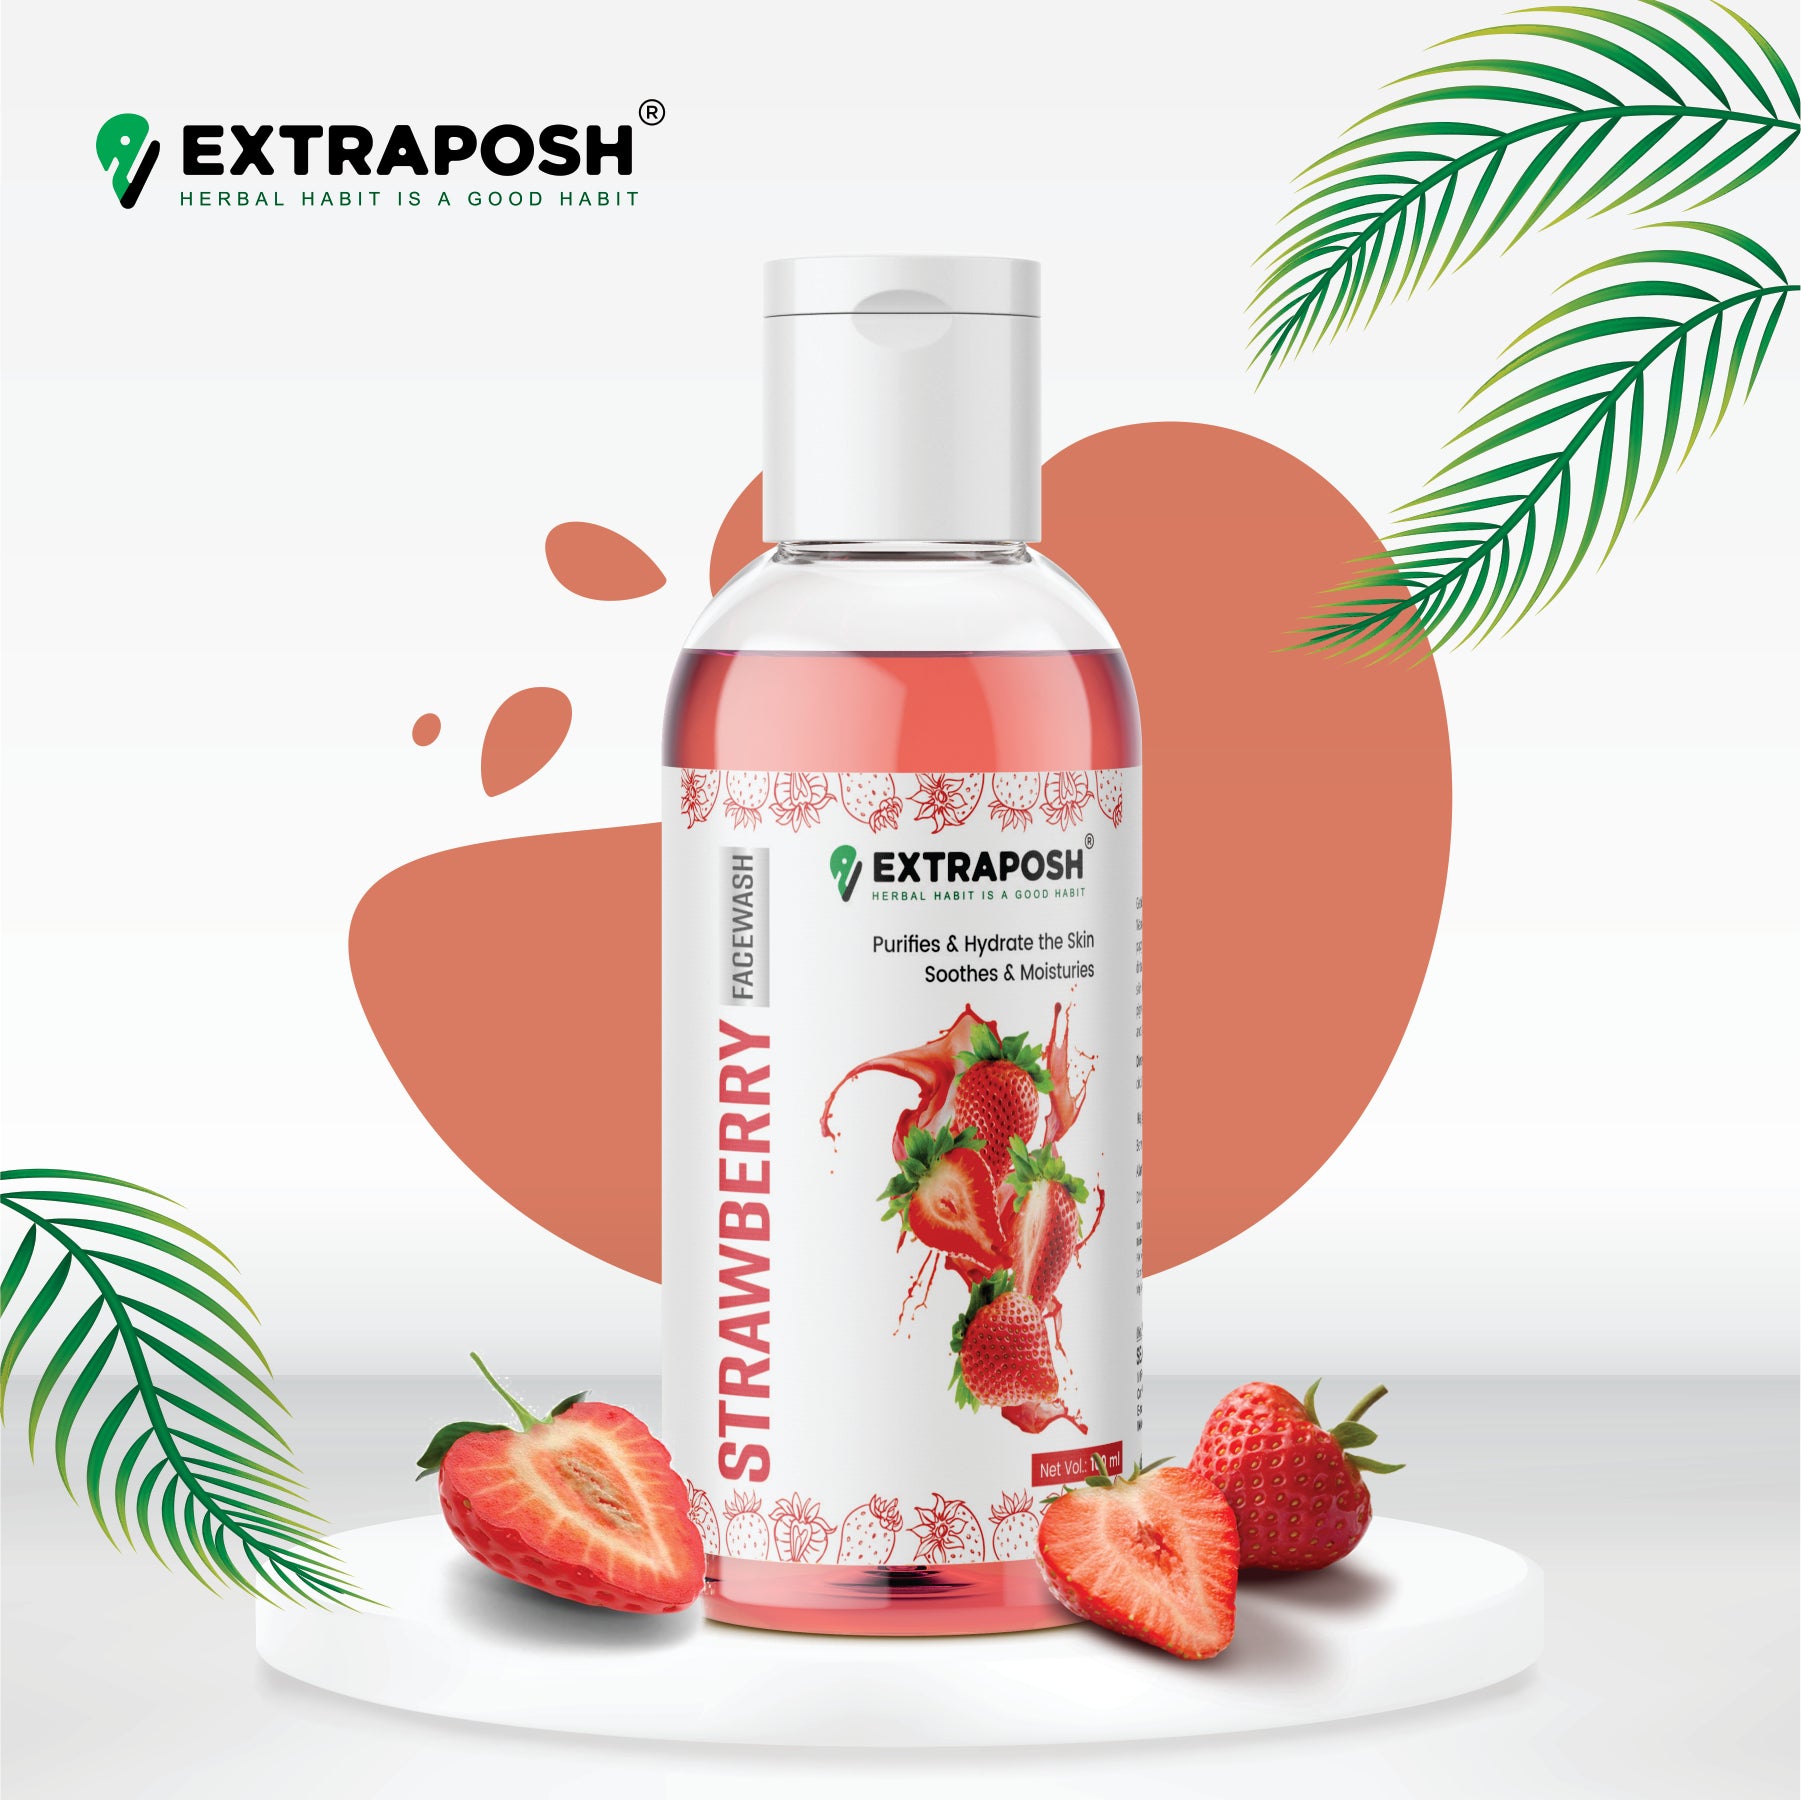 Fruity Skin Care - Strawberry Face Wash - Get Glowing Skin Naturally